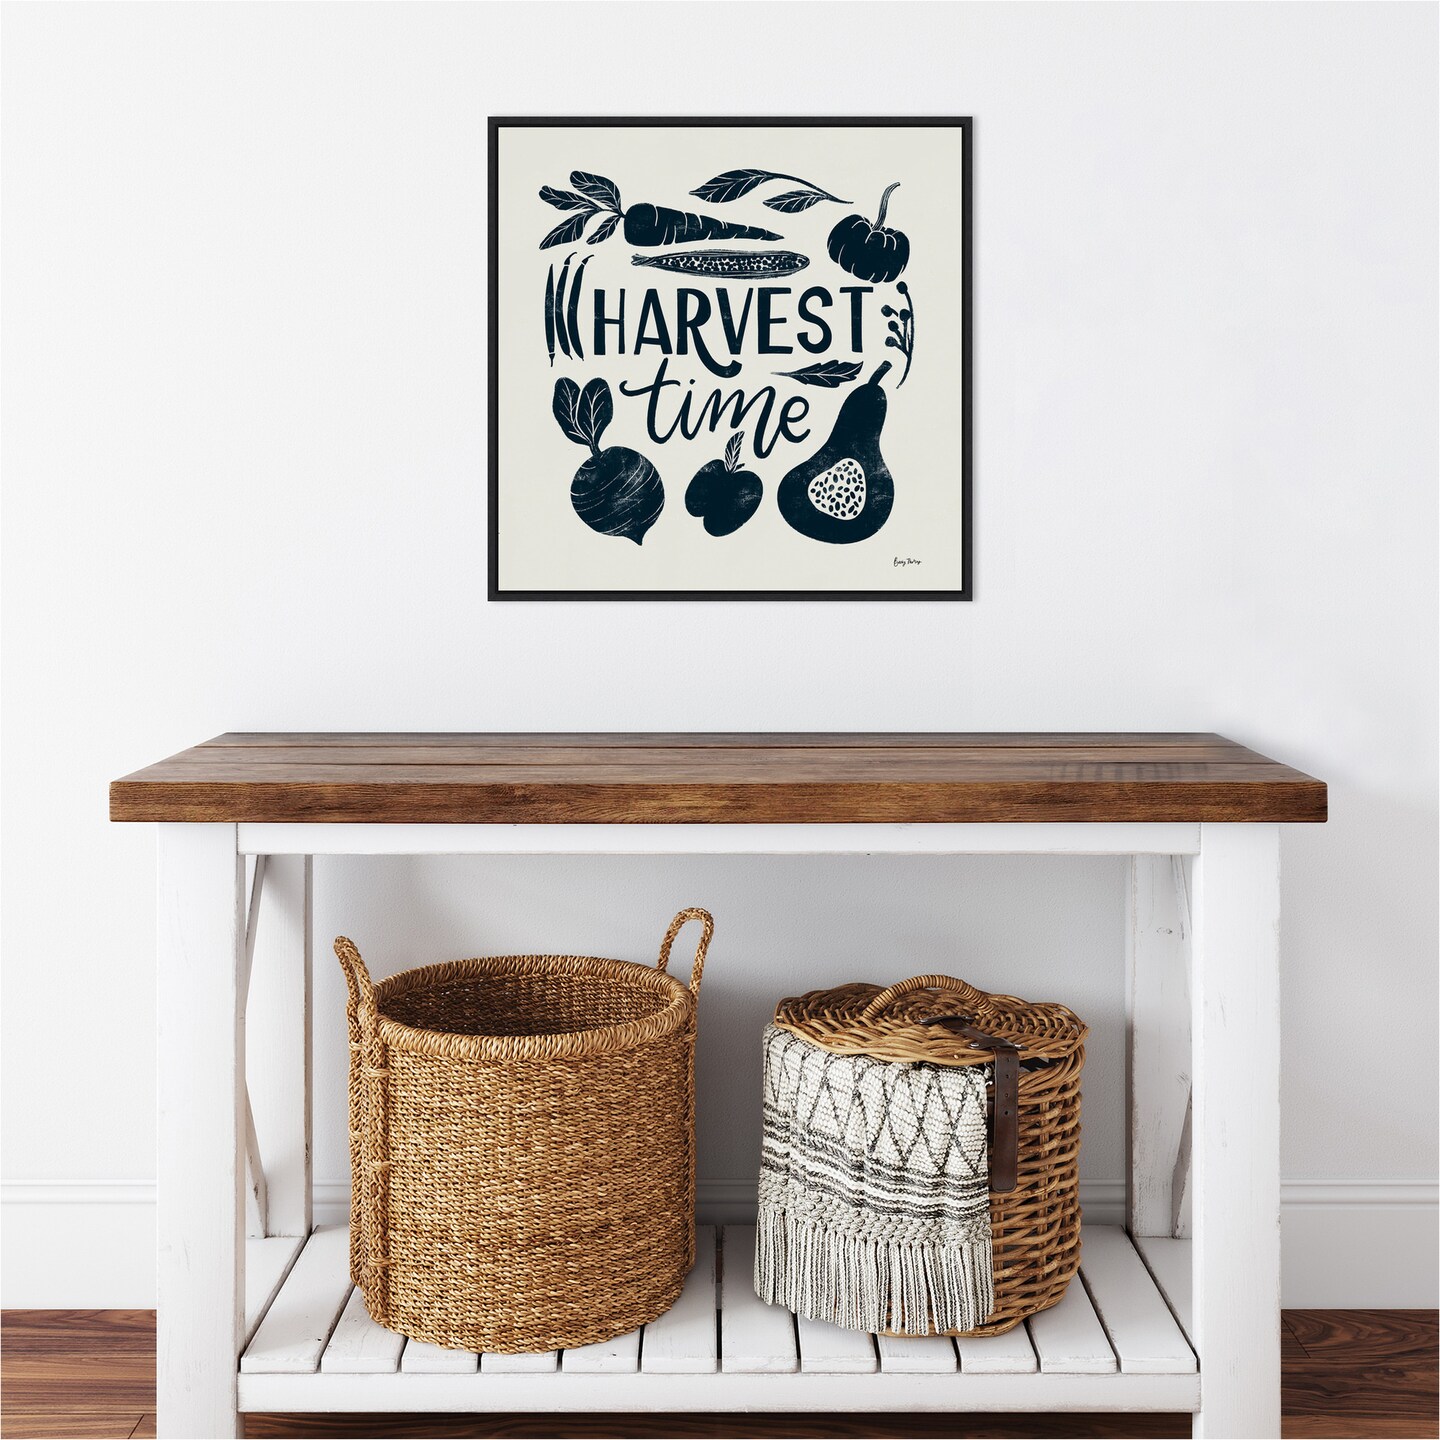 Harvest Lettering I Blue by Becky Thorns 22-in. W x 22-in. H. Canvas Wall Art Print Framed in Black